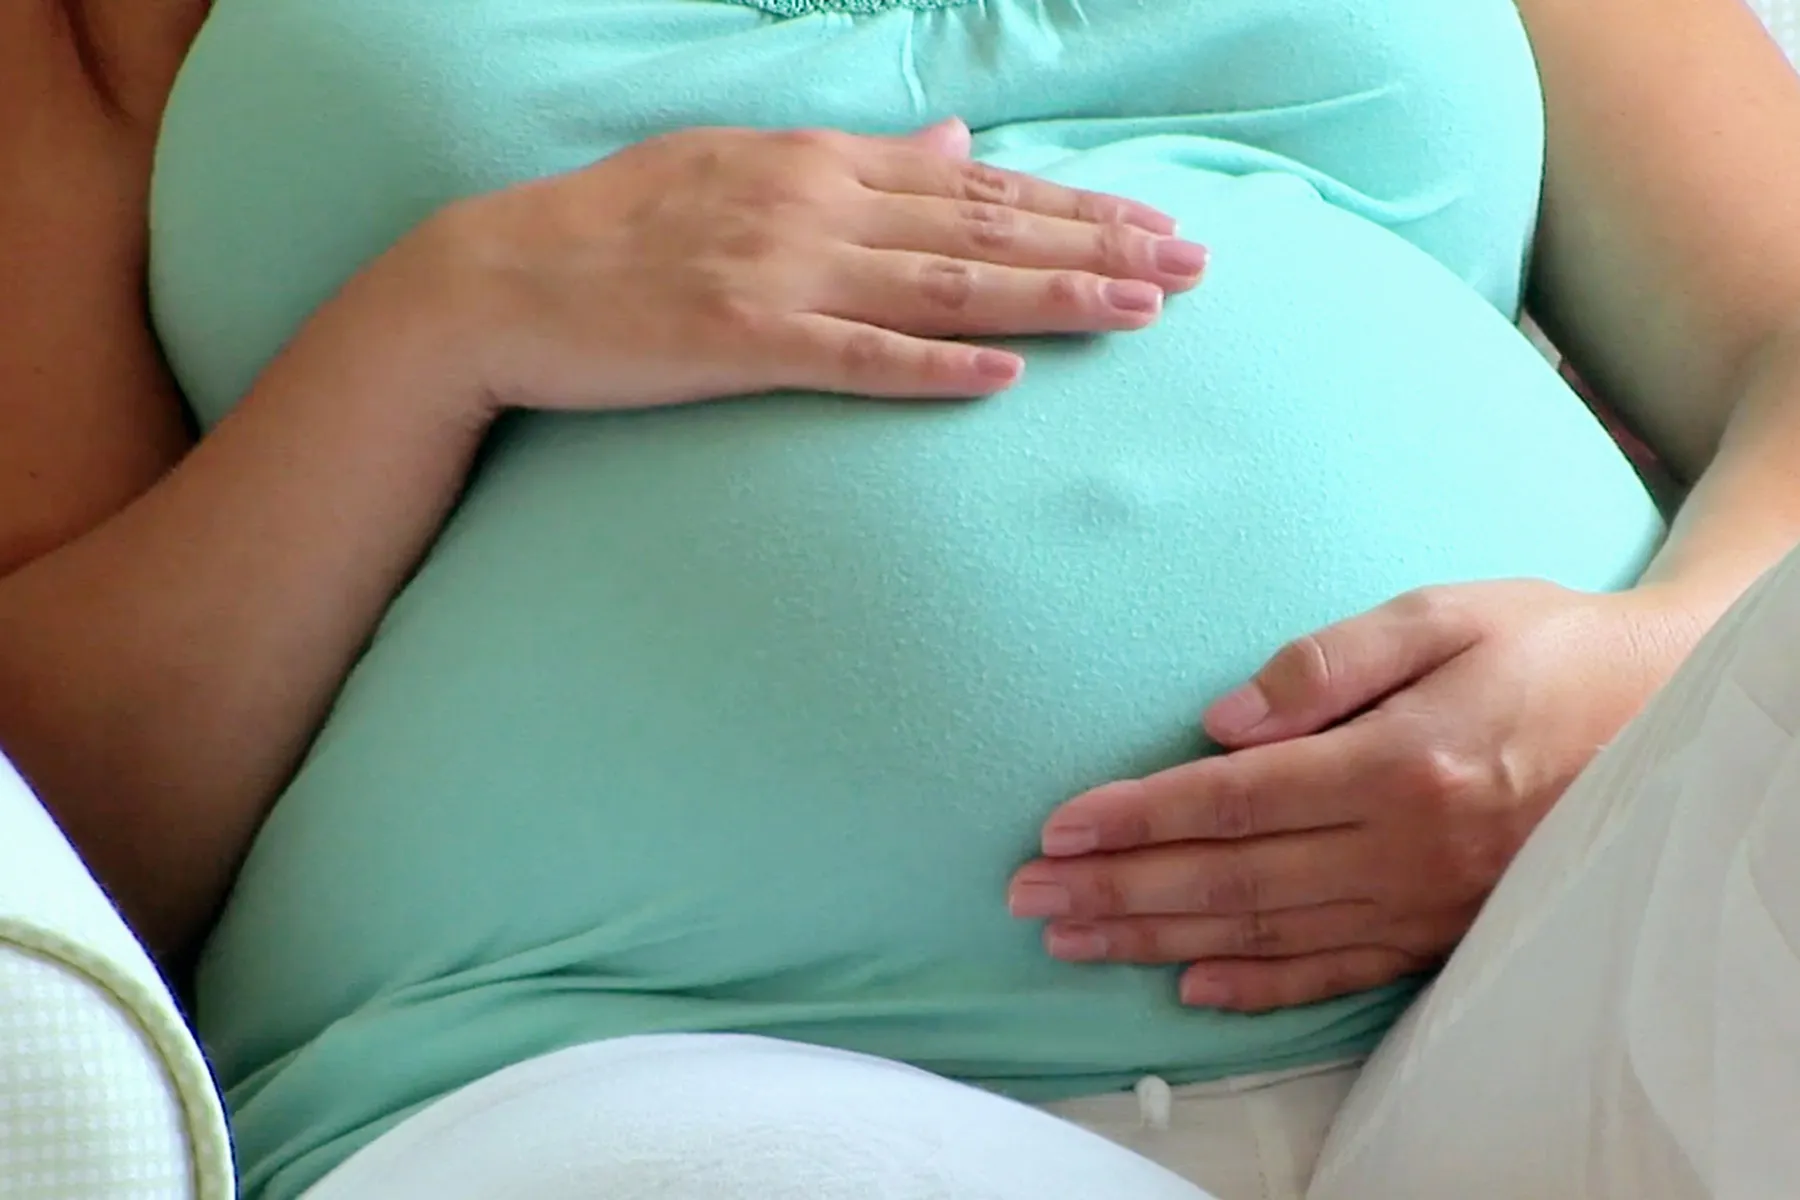 Pregnant Women Face Higher Odds of  COVID Infection